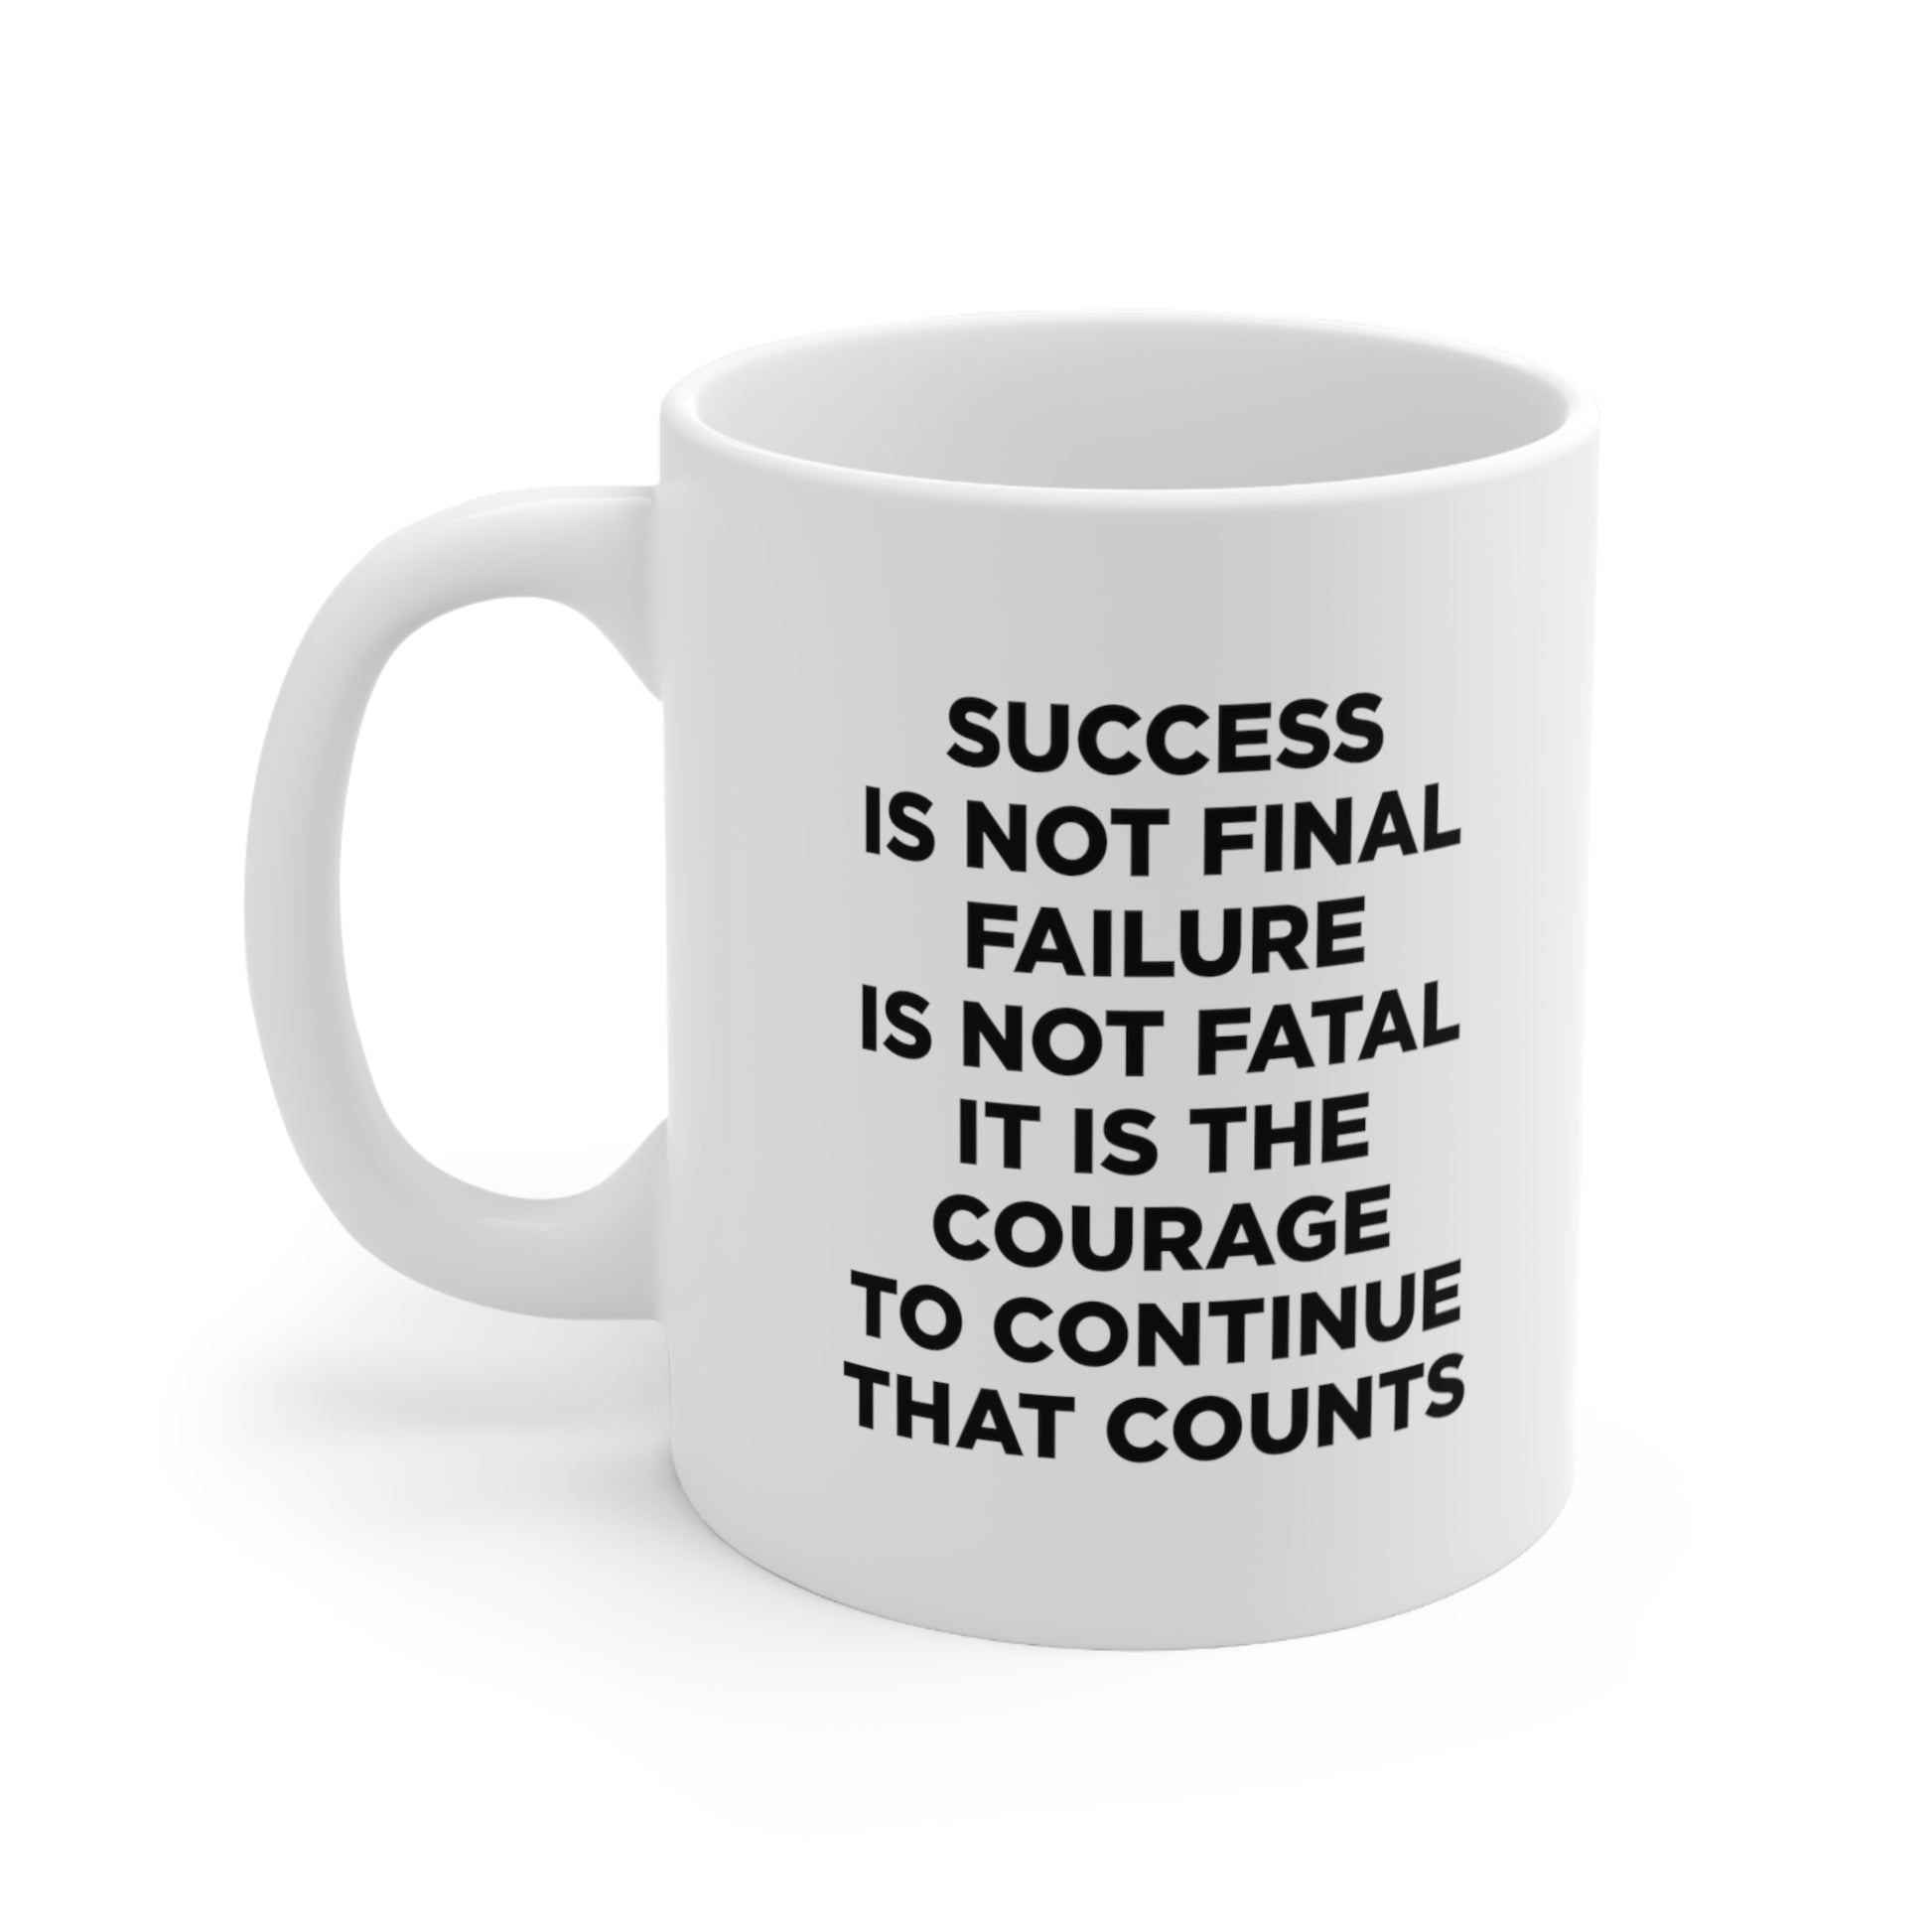 Success is not final failure is not fatal It is the courage to continue that counts Mug 